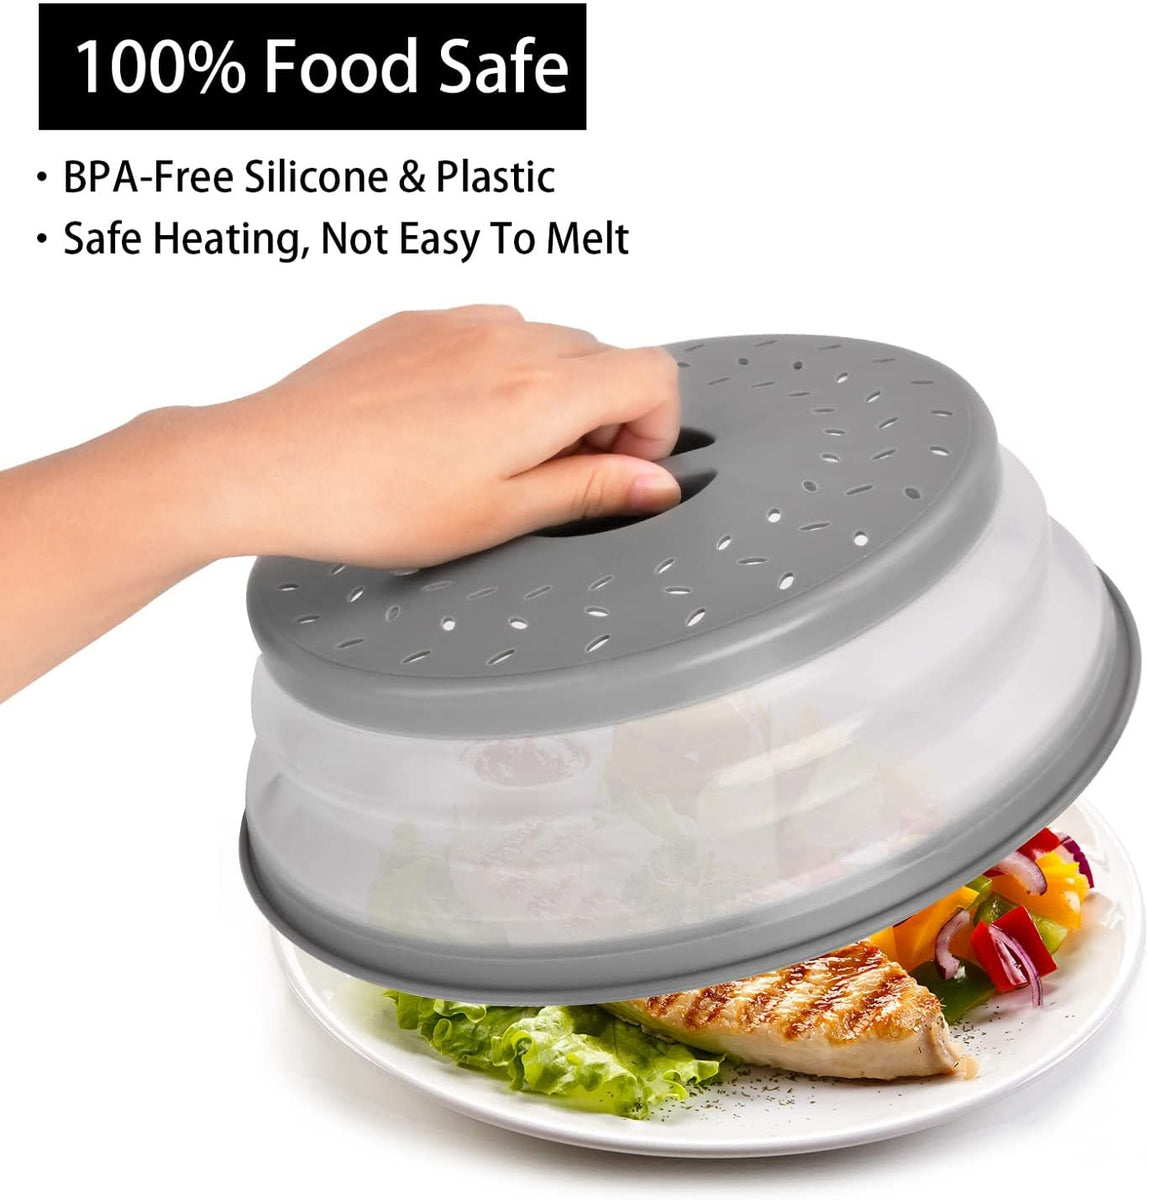 Alimaro Foldable Microwave Lid with Hook Design , Multi-Purpose Microwave Sleeve Collapsible Food Plate Cover BPA-Free & Non-Toxic for Kitchen Cooking